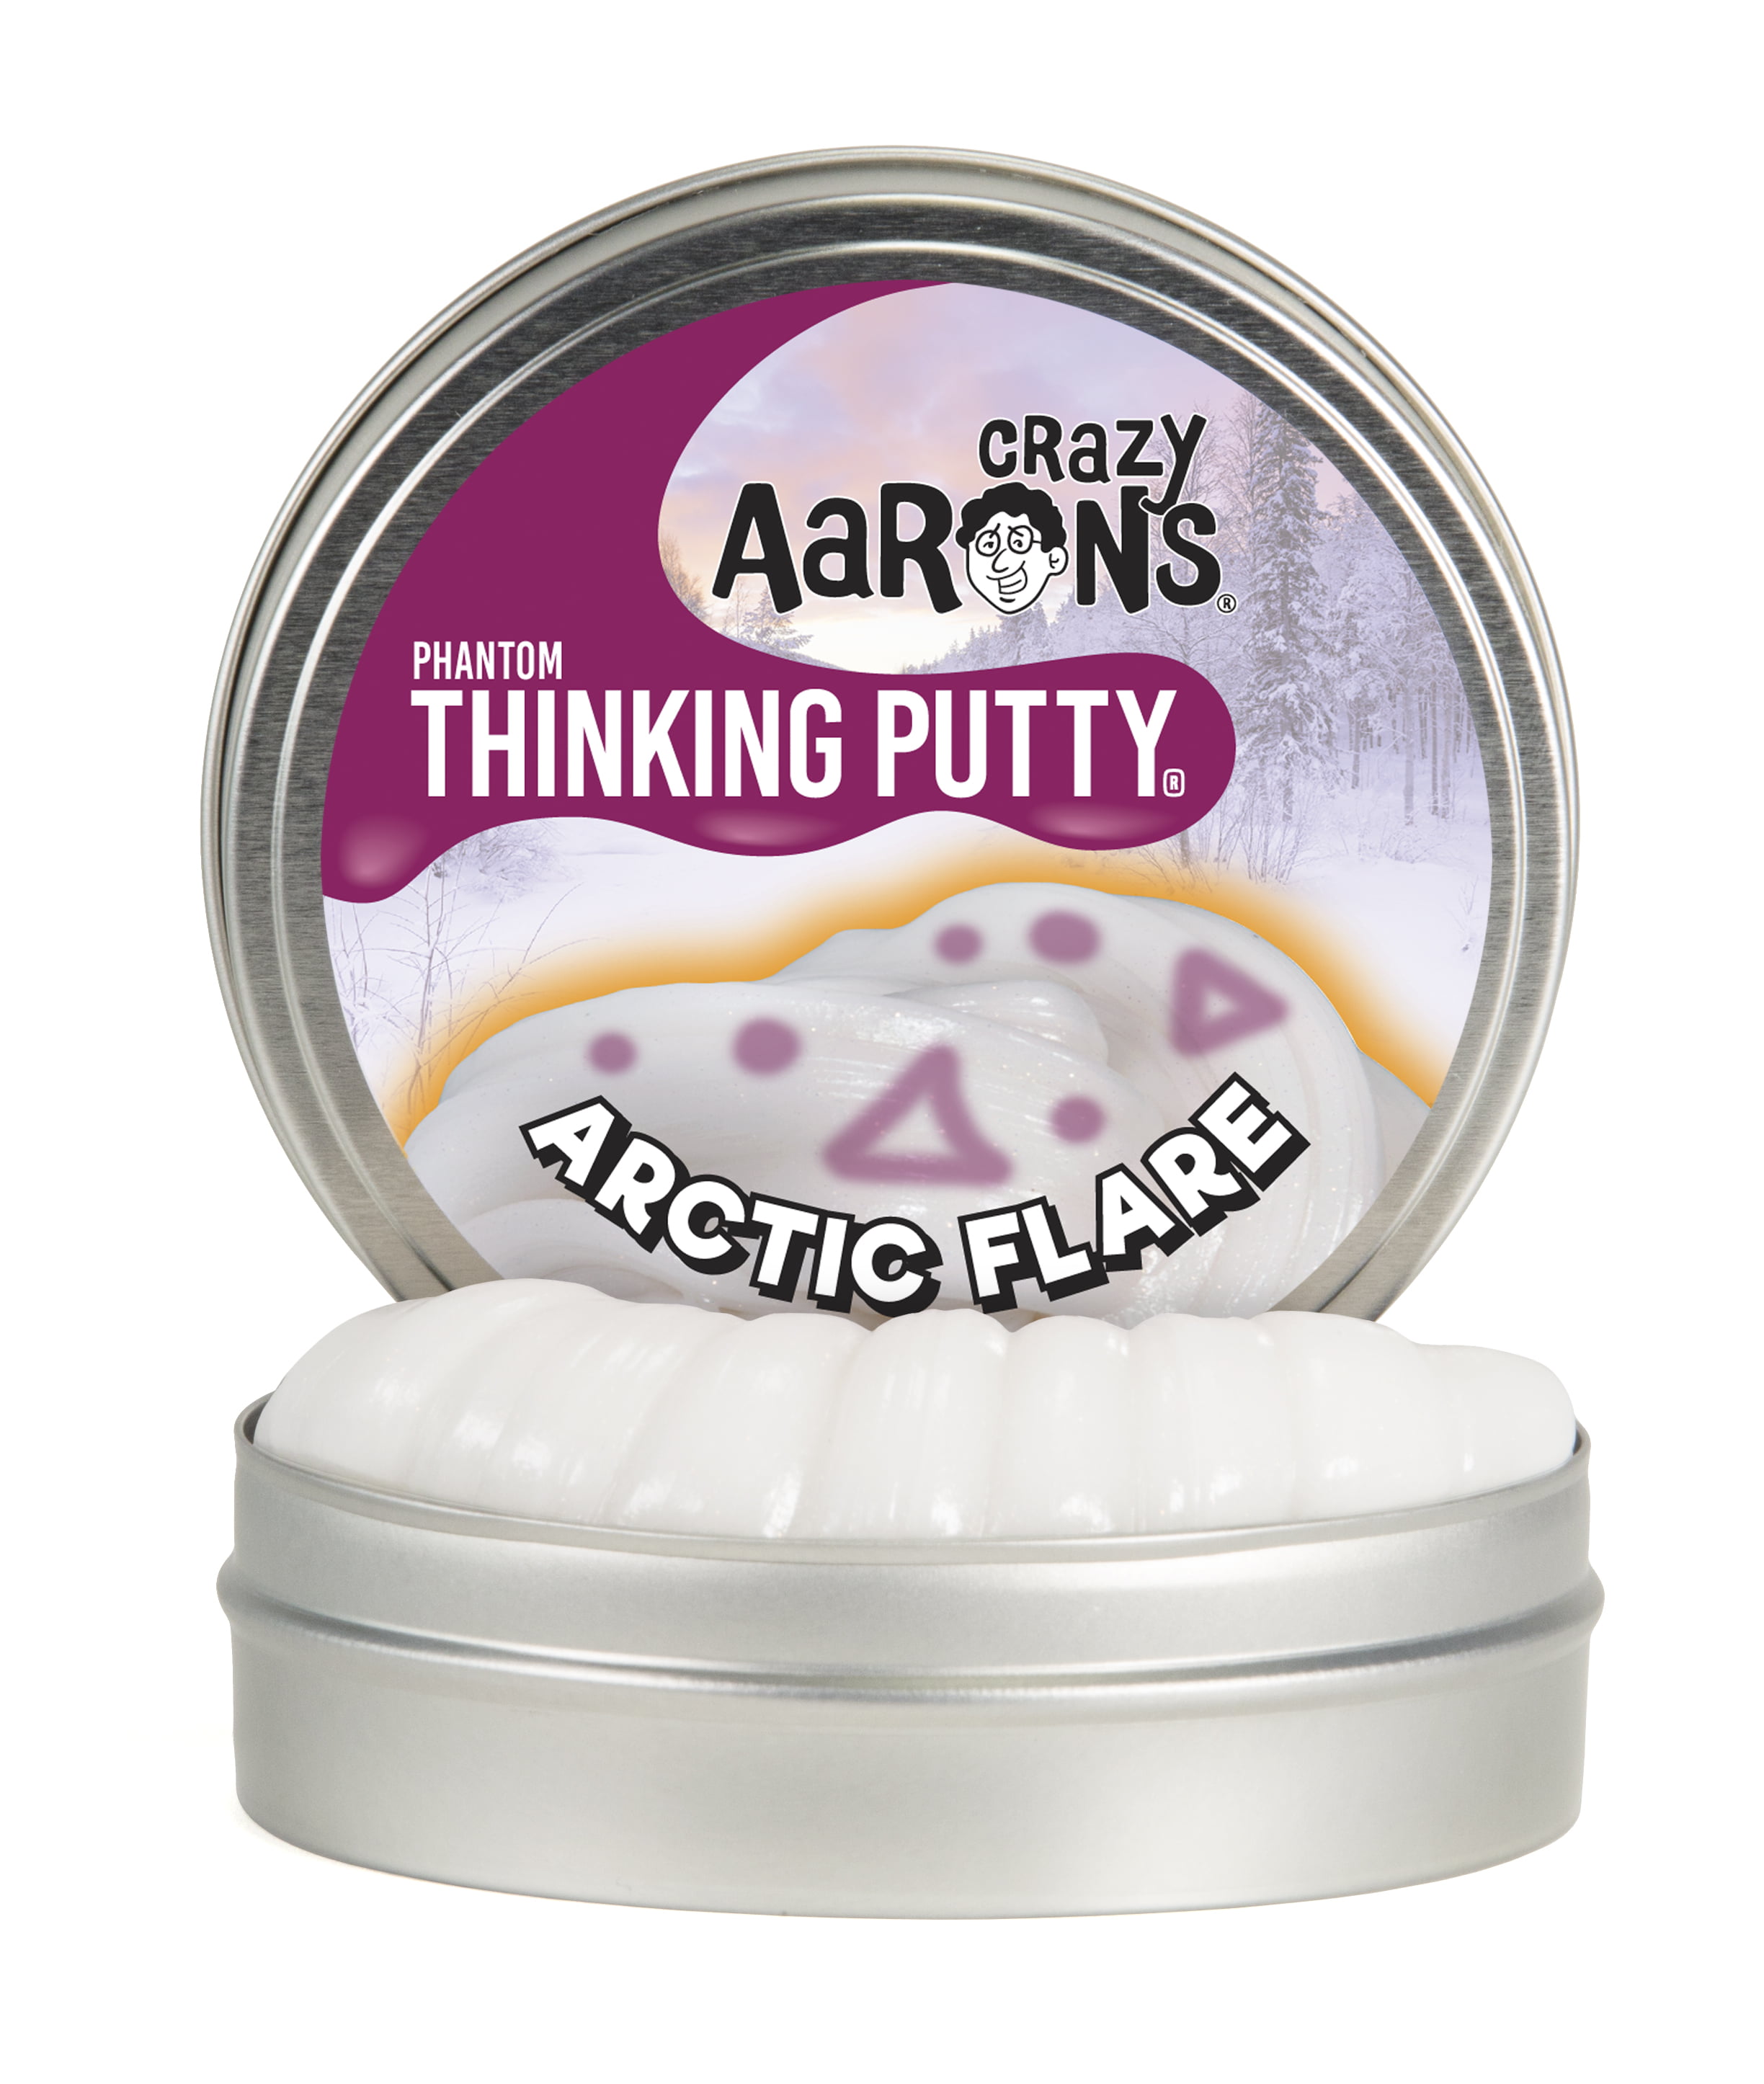 NEW Crazy Aaron’s Primary Thinking Putty Lot of 2 Purple & Pink 3.2 oz Tins 